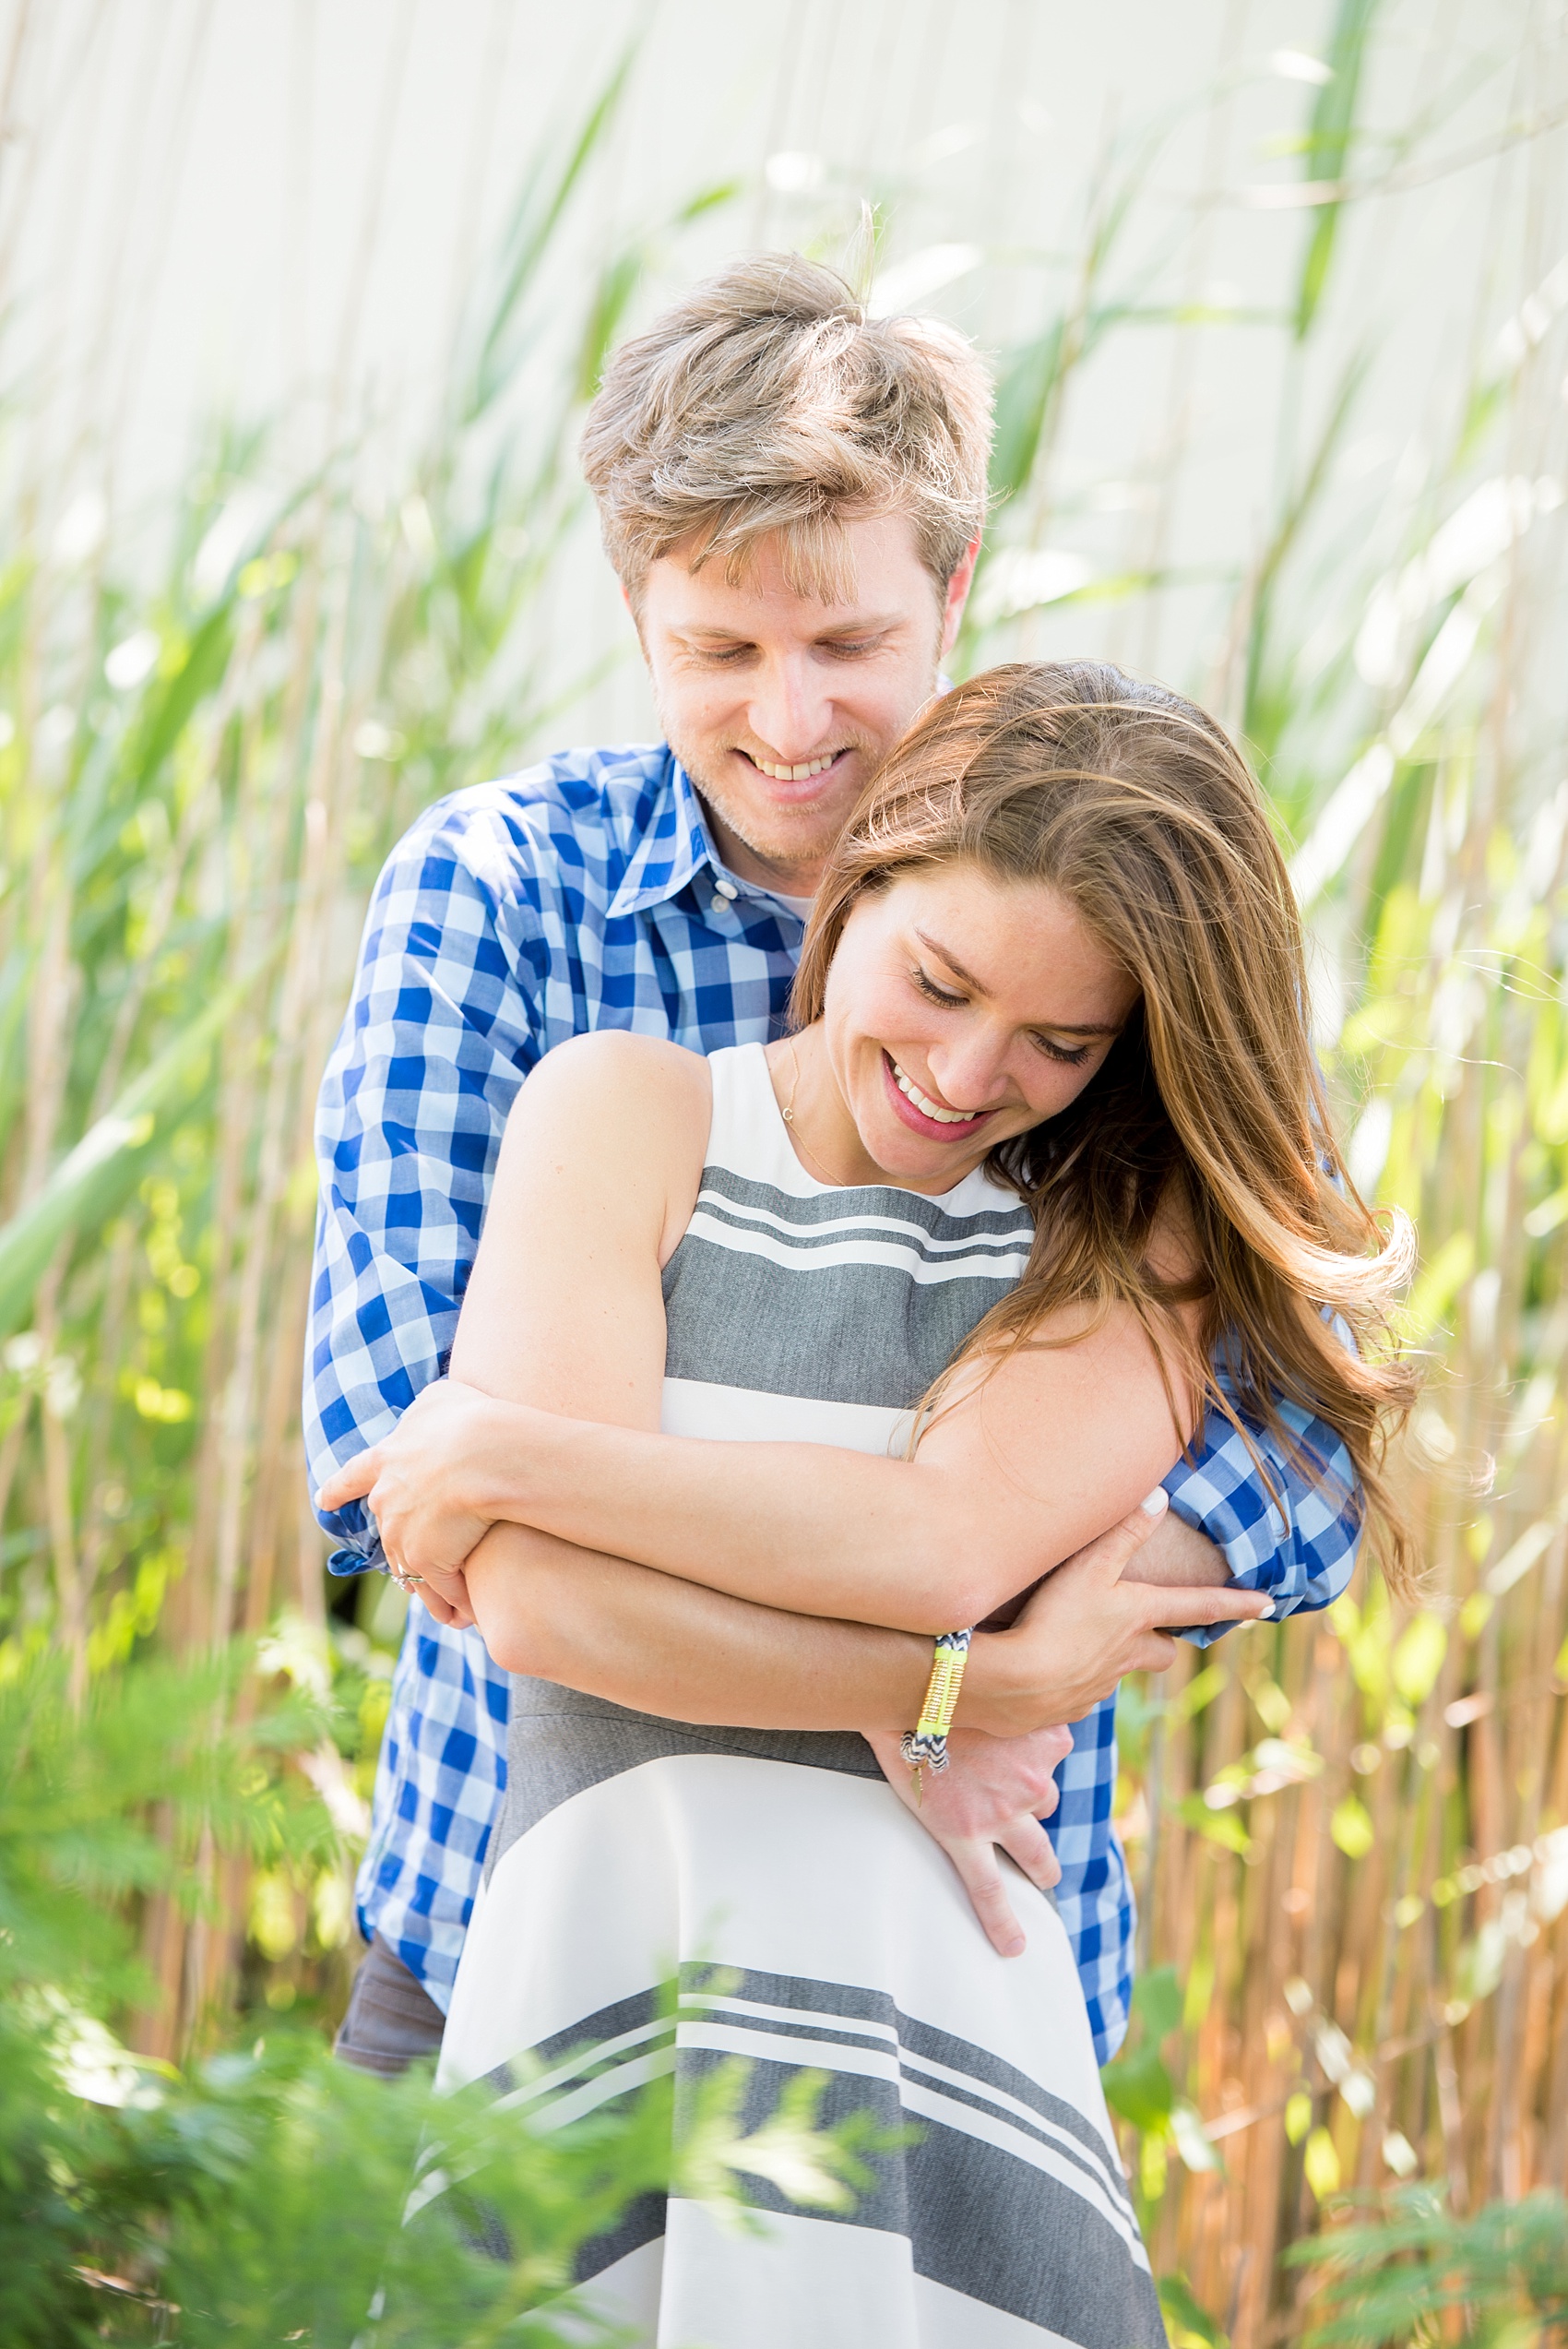 Mikkel Paige Photography captures a Bay Head, NJ engagement session in parks with waterfront views.